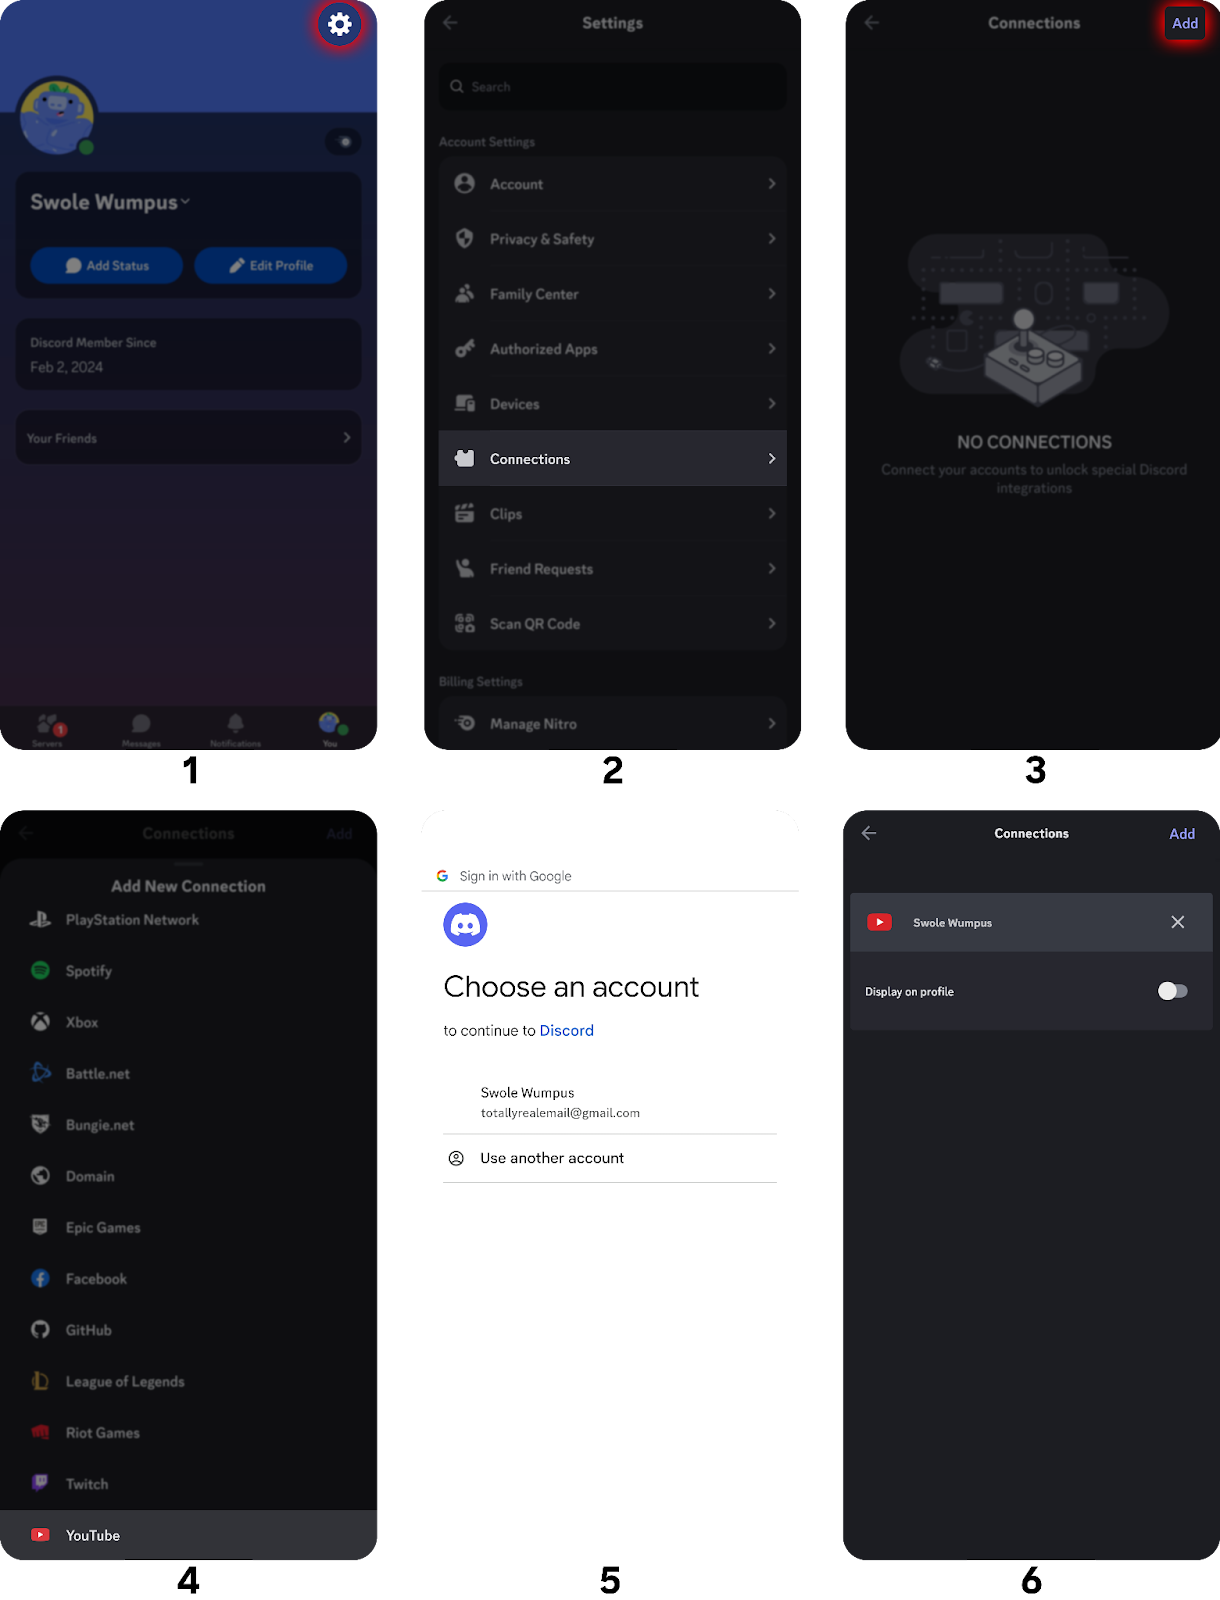 Steps of connecting a YouTube account to a Discord account